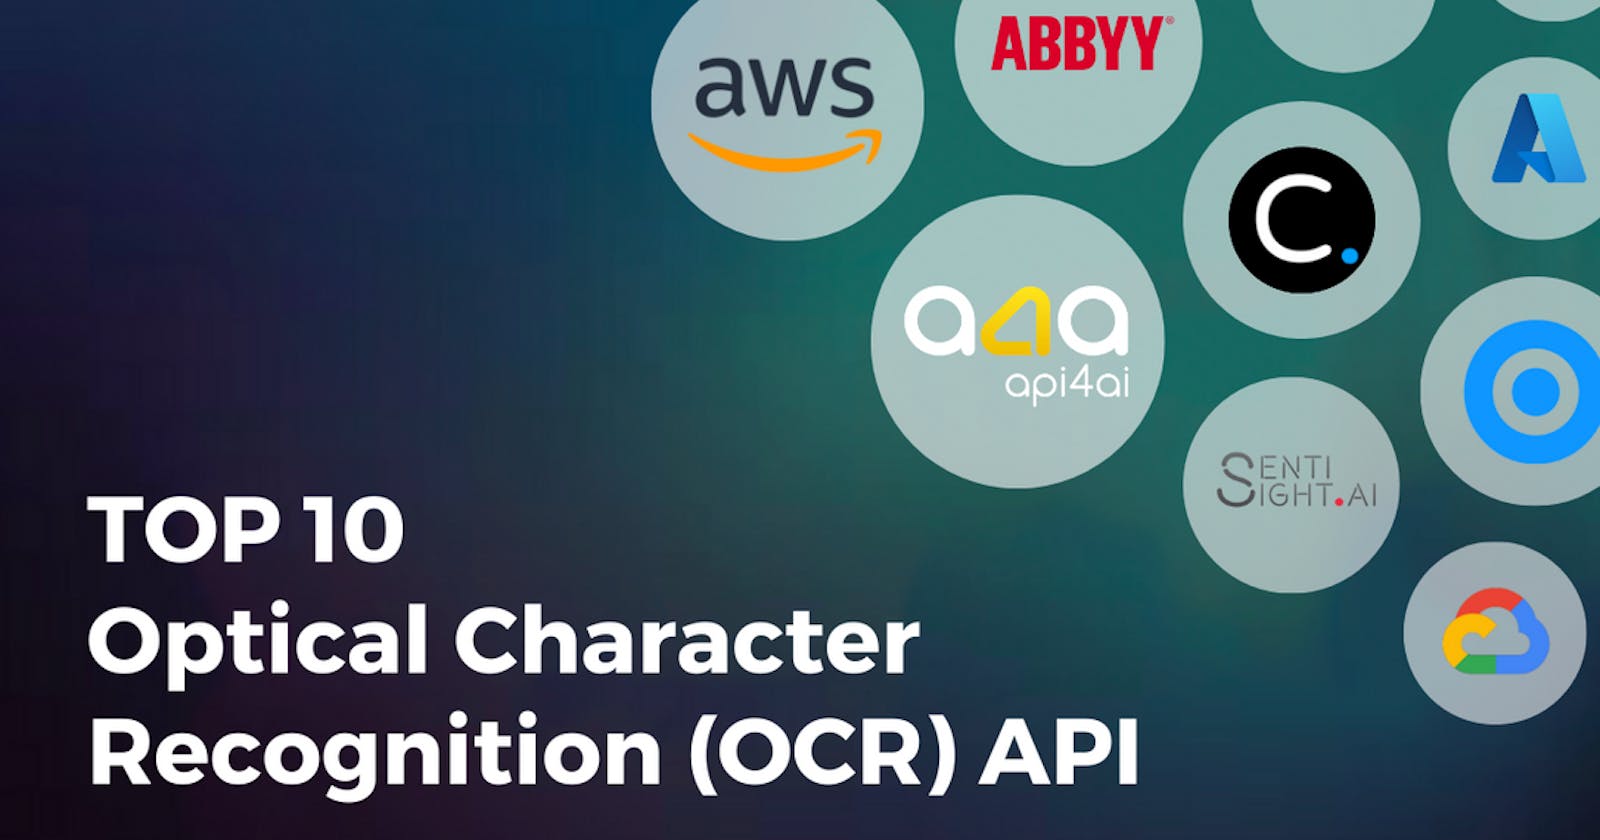 TOP 10 Optical Character Recognition (OCR) API